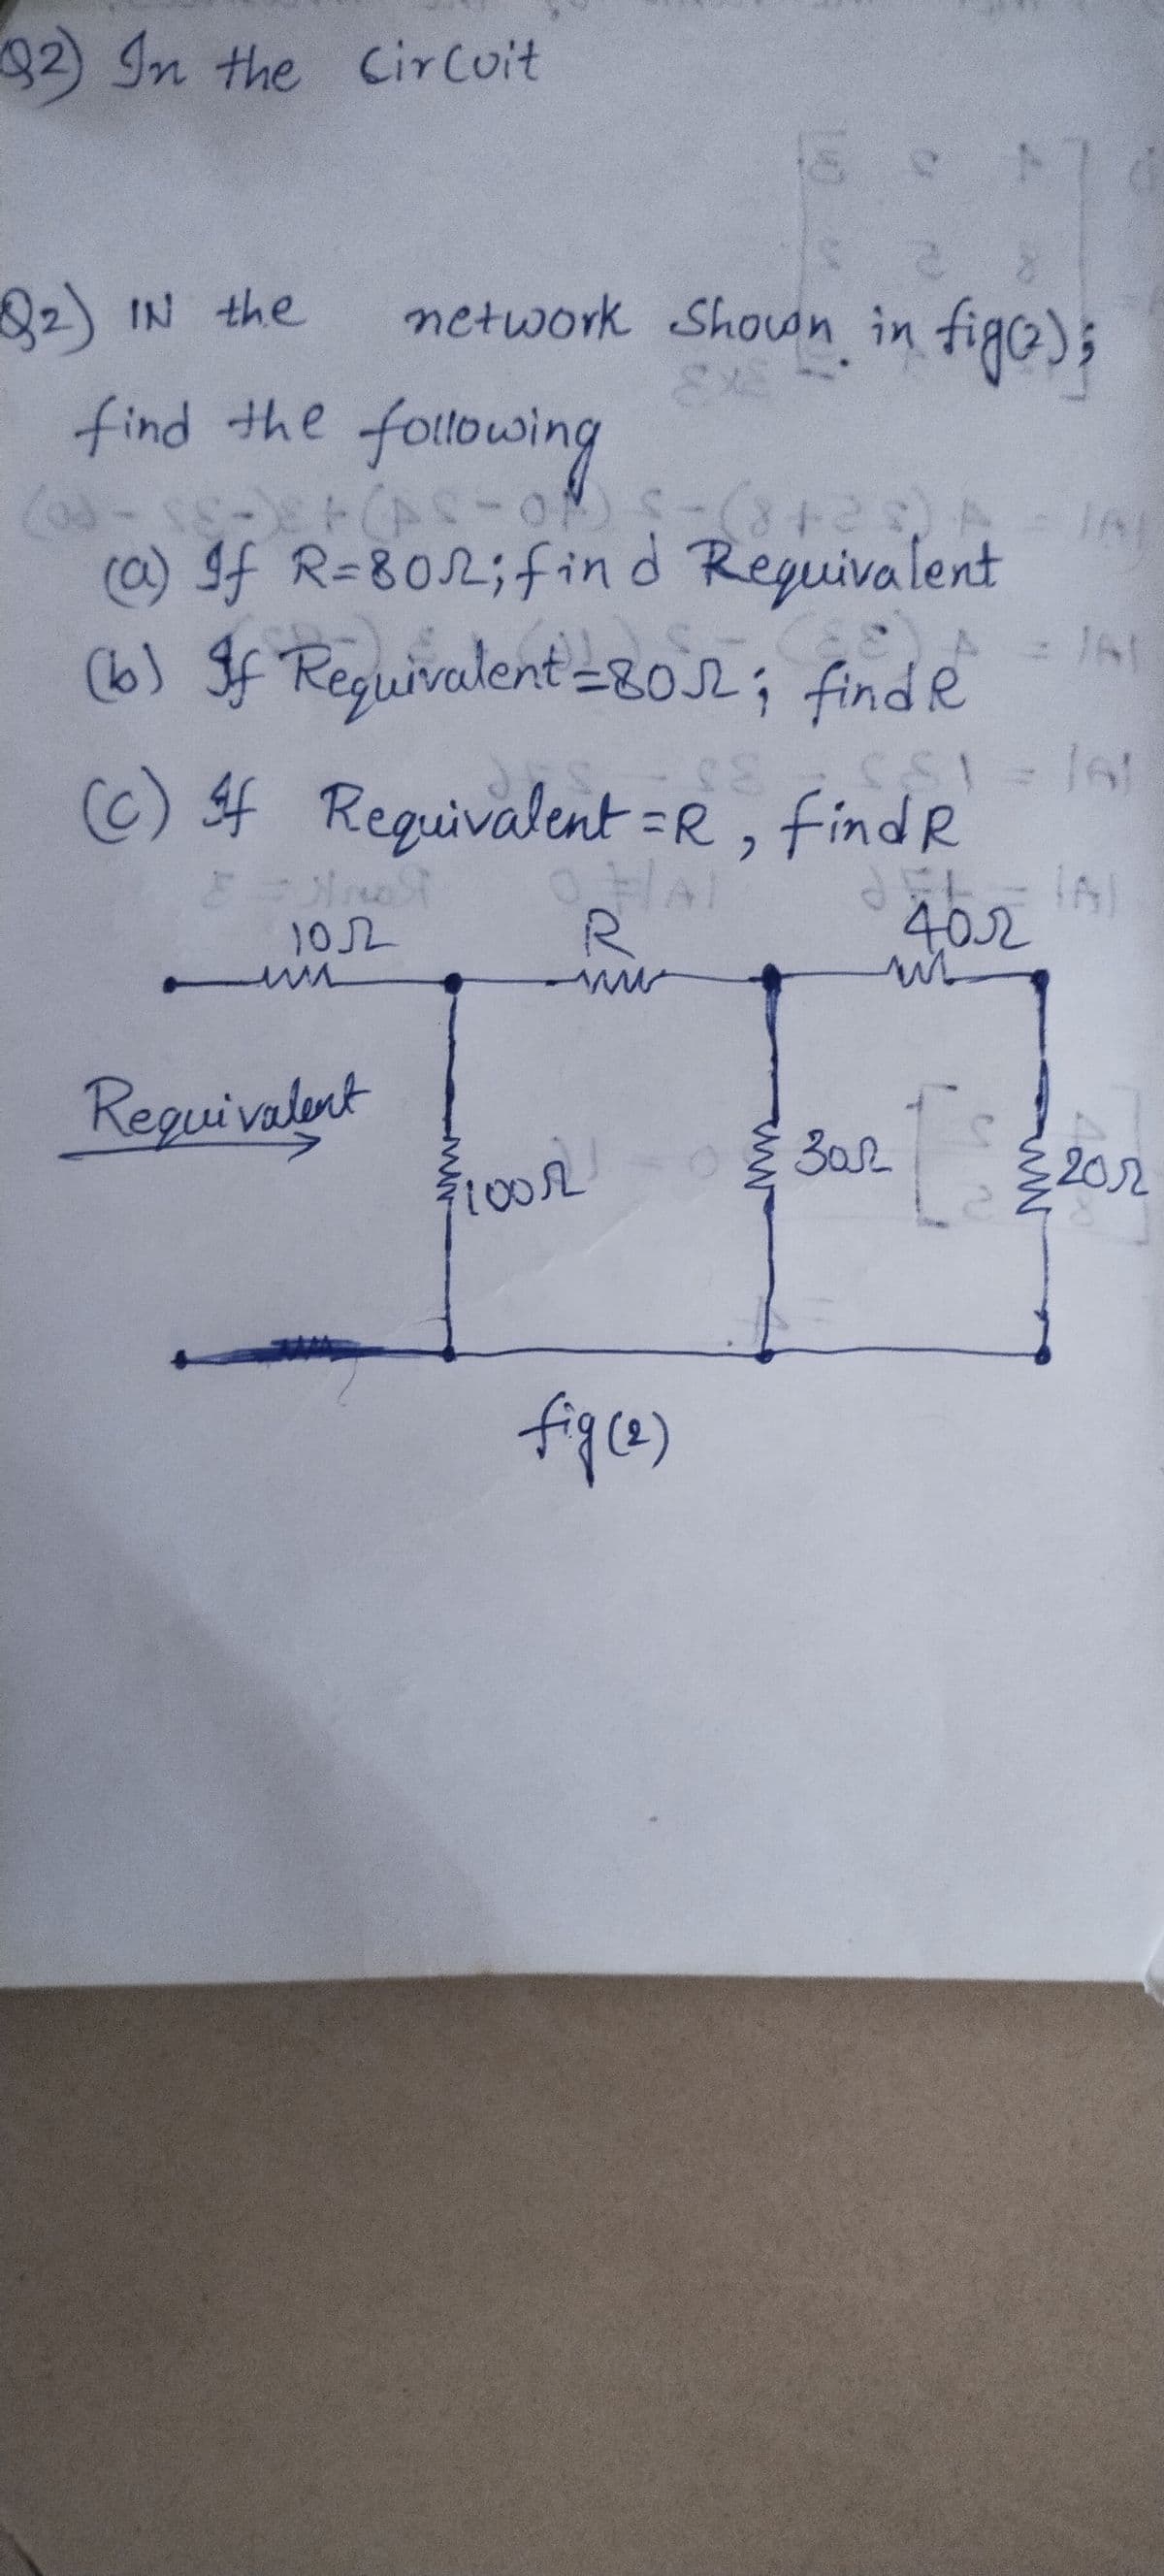 82) In the Circuit
17
82) IN the
network Shown in fige);
find the following
(@) If R=802;fin d Reguivalent
(6) If Reguivalent=80e; finde
(6)f Reguivalent =R , findR
HAI
102
Reguivalent
1002
కియ
202
